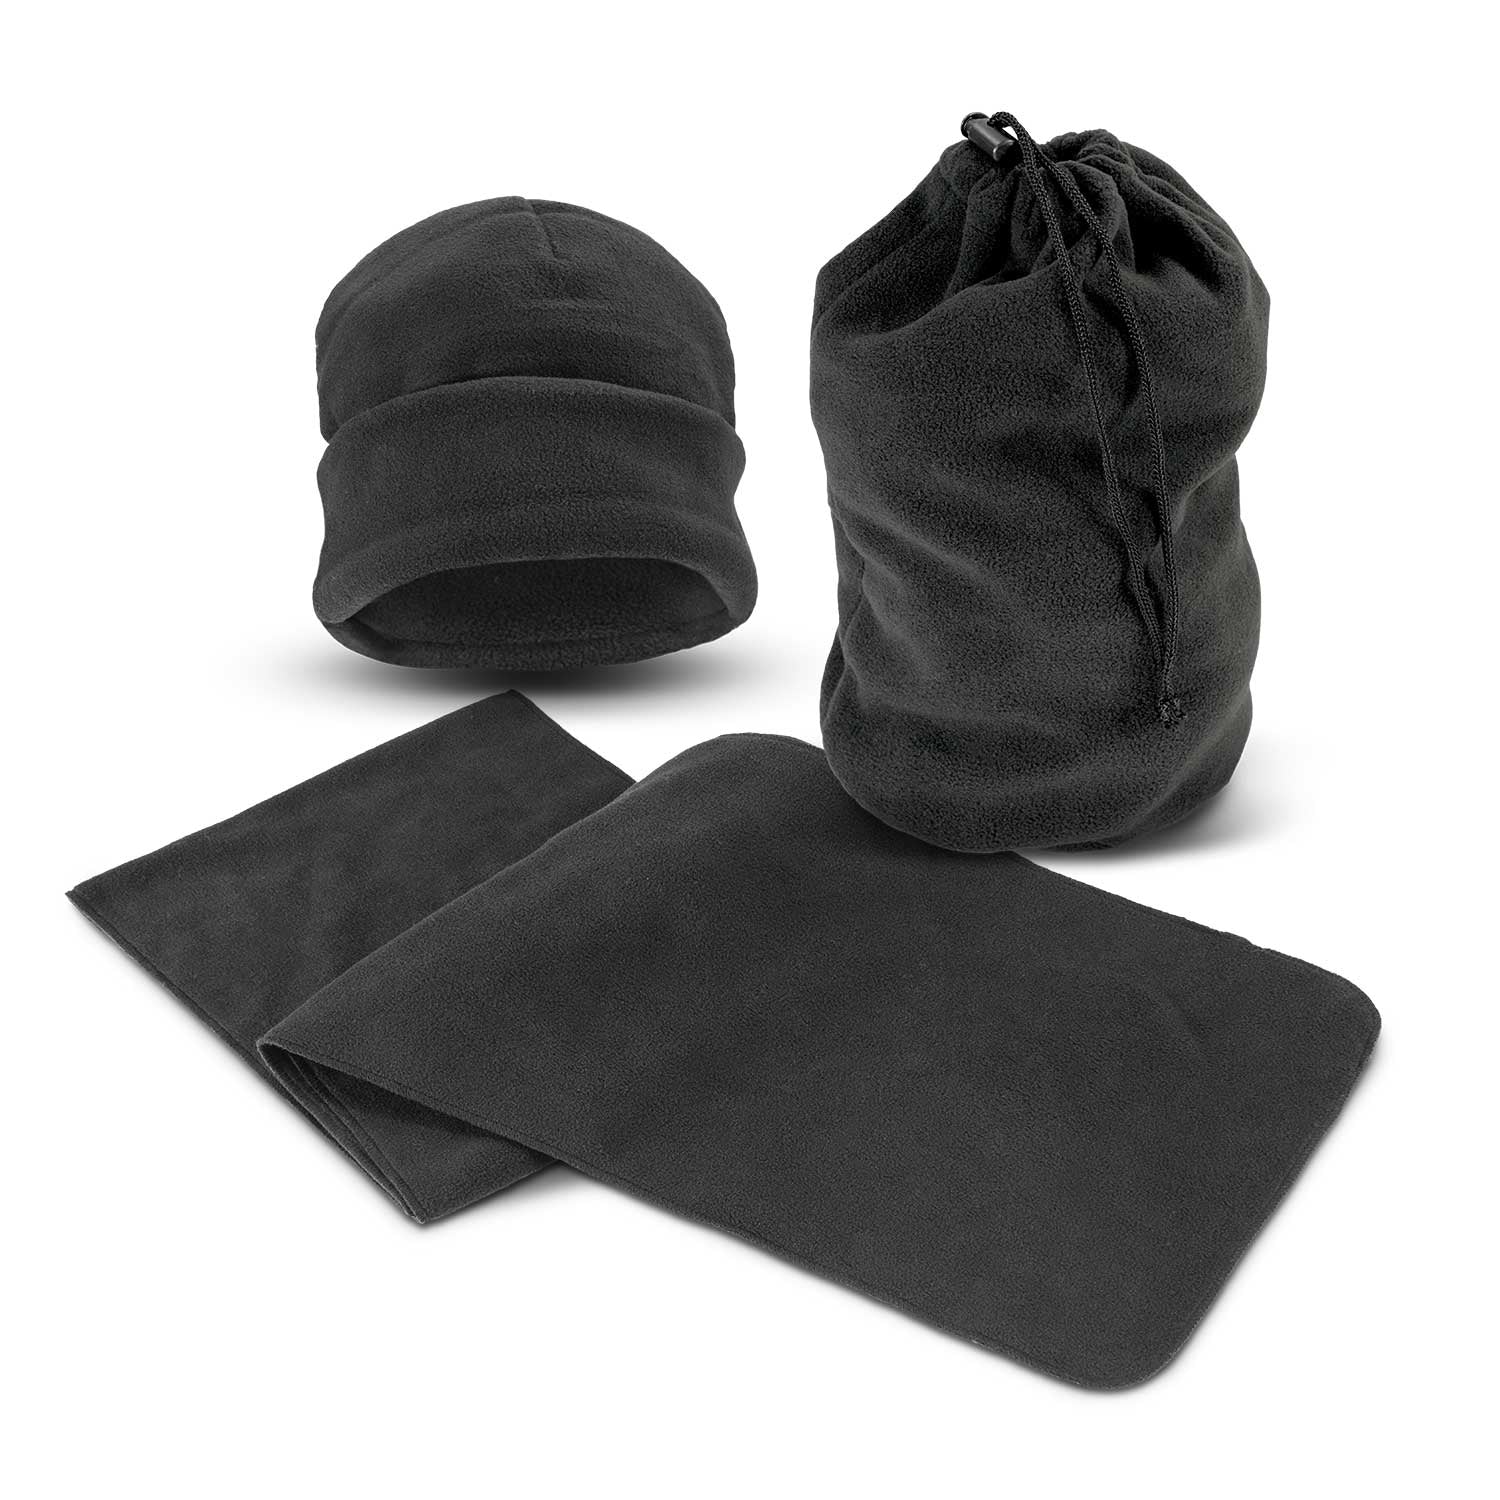 Seattle Scarf and Beanie Set [113844 - Black]